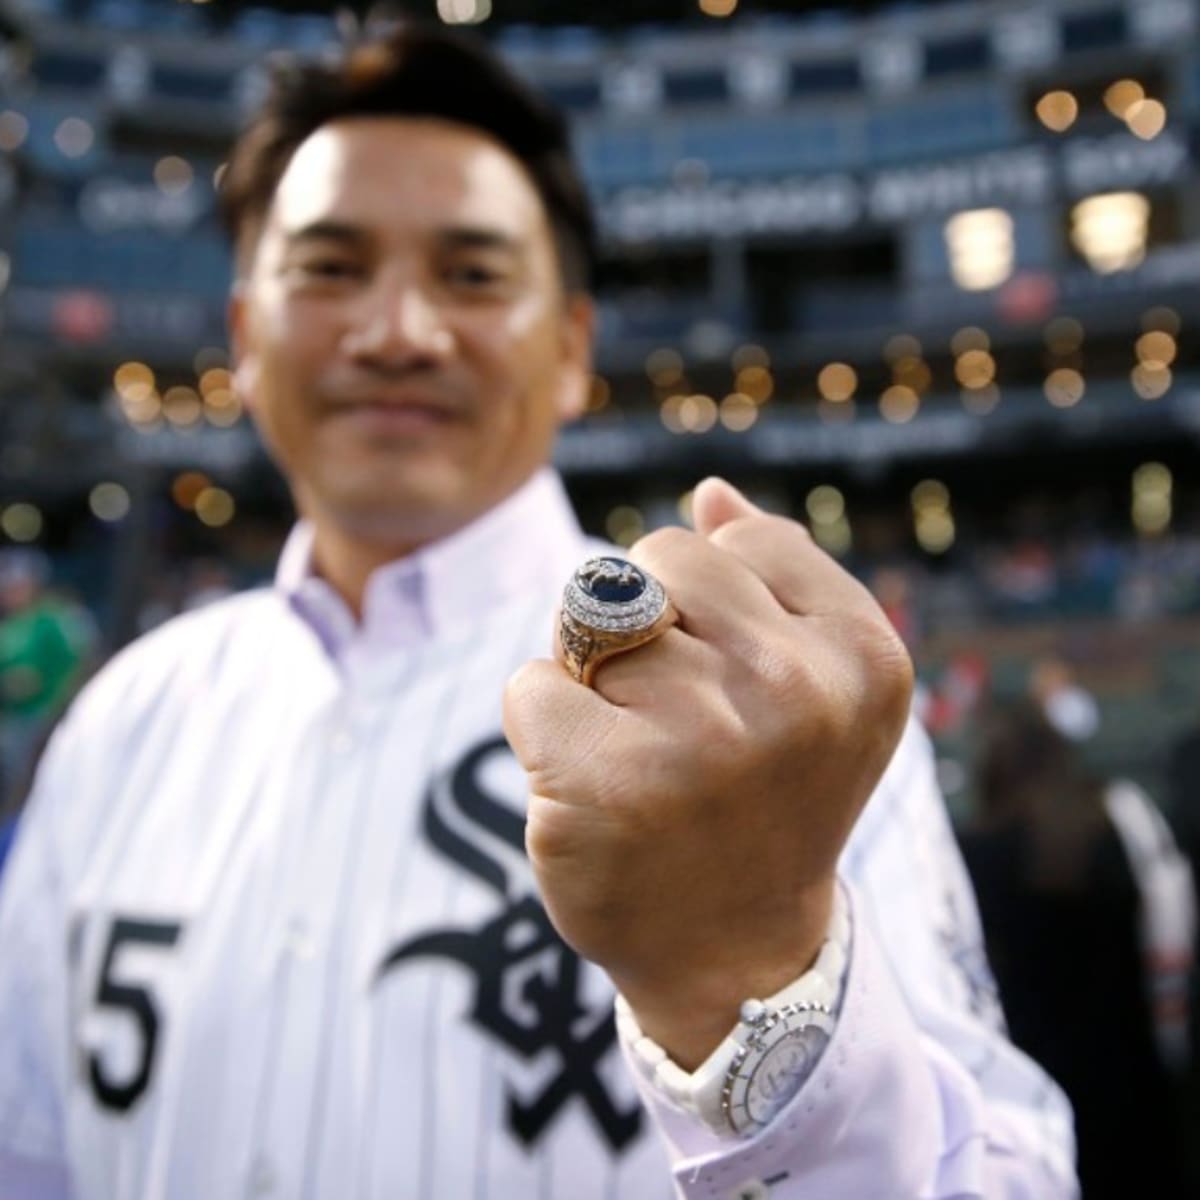 Chicago White Sox: 2005 postseason record stands the test of time